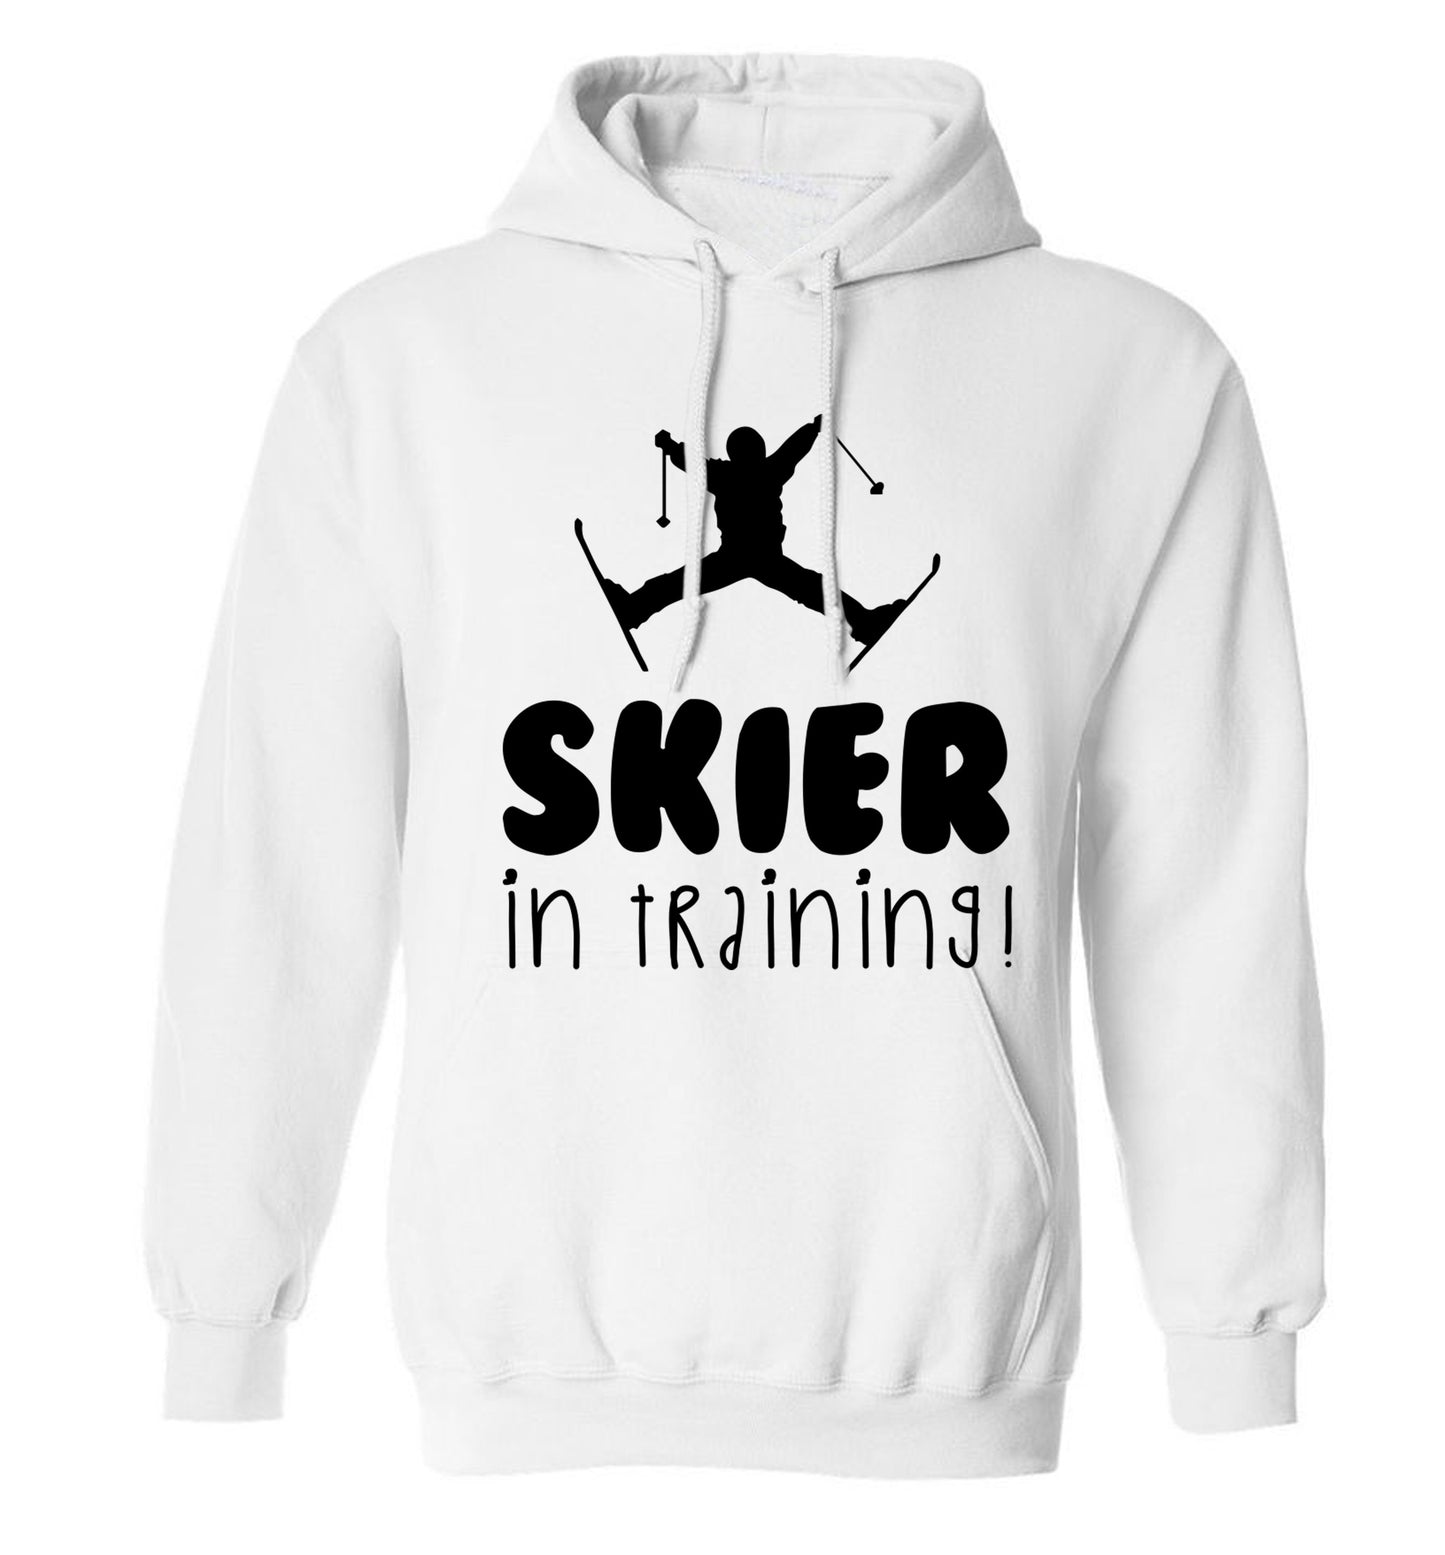 Skier in training adults unisex white hoodie 2XL